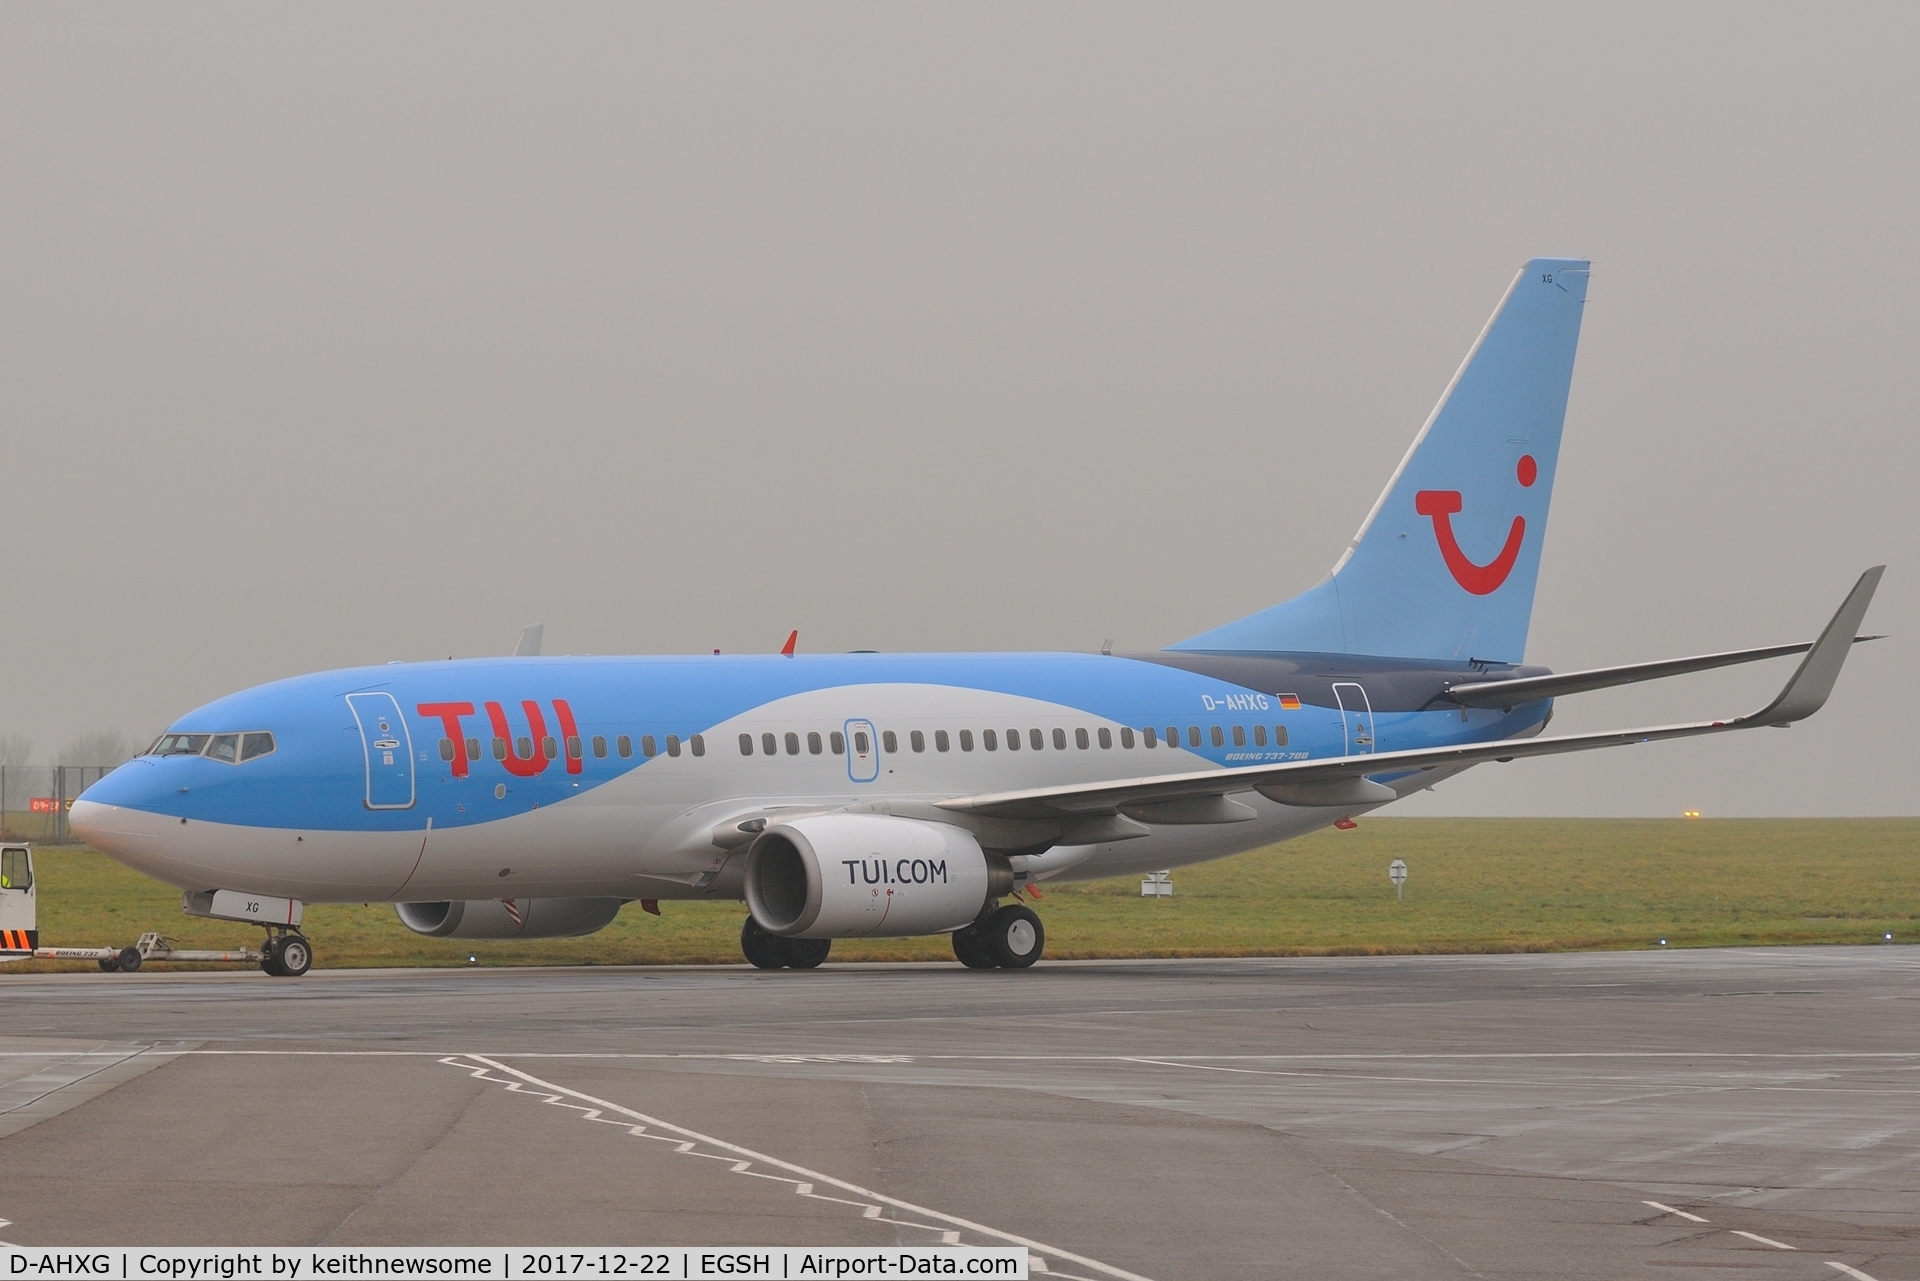 D-AHXG, 2008 Boeing 737-7K5 C/N 35140, Removed from spray shop with TUI colour scheme.